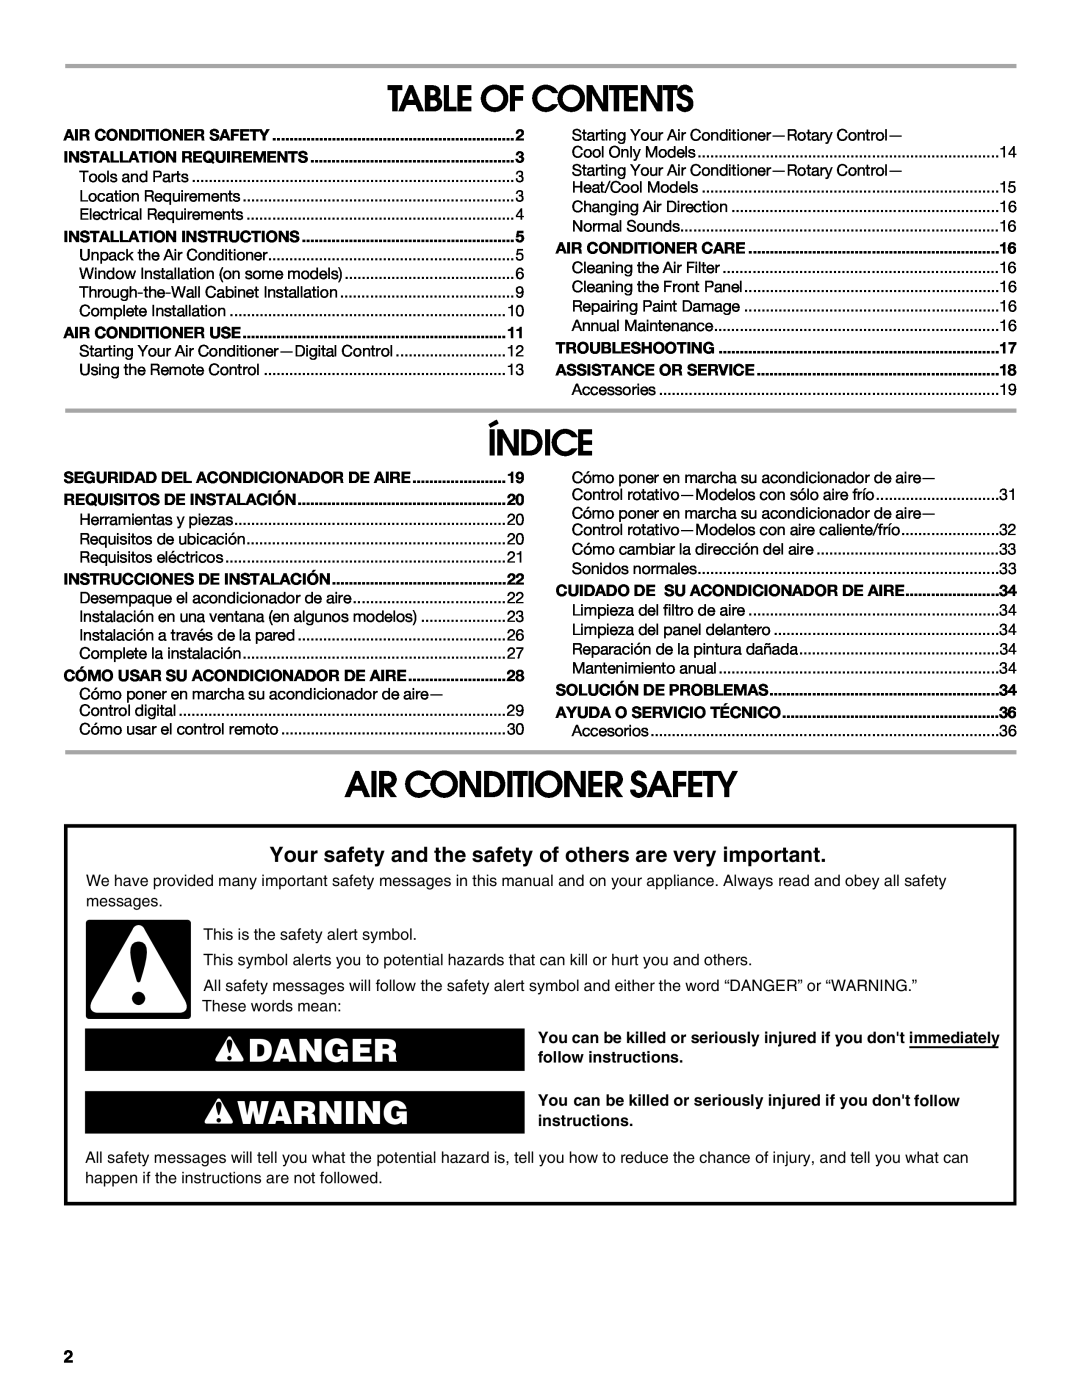 Whirlpool ACE184PT0 manual Table Of Contents, Índice, Air Conditioner Safety, Danger 